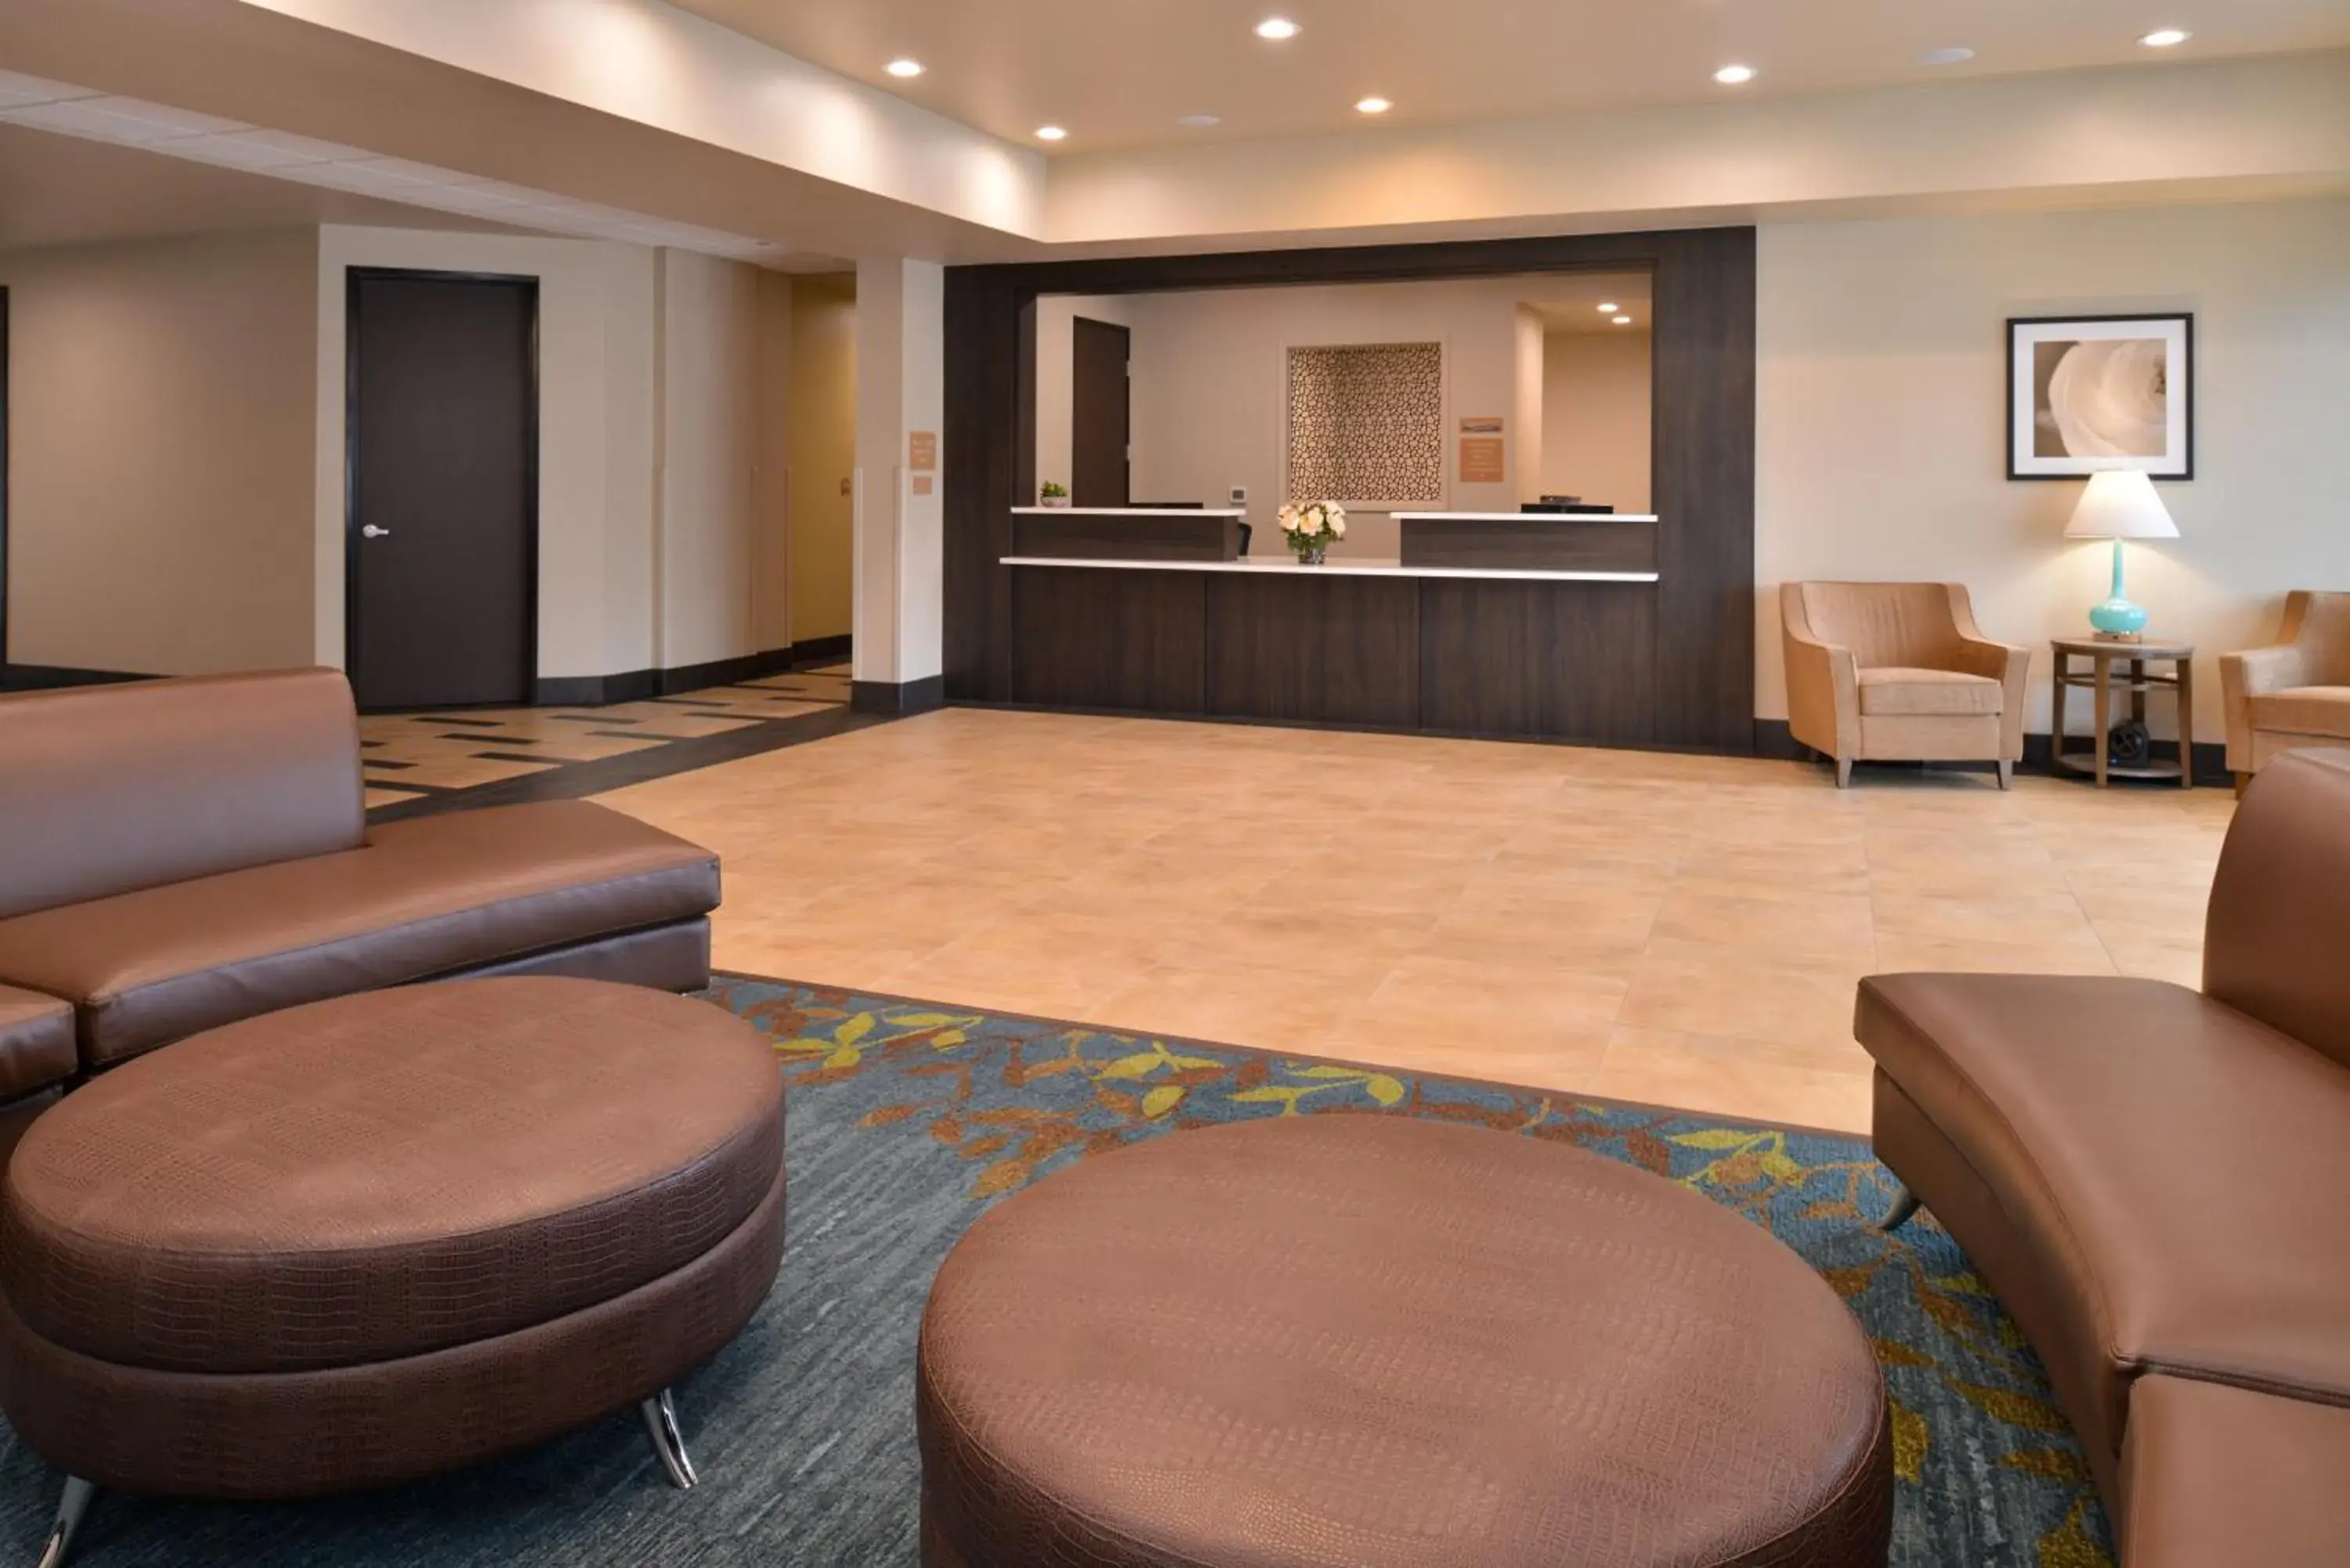 Property building in Candlewood Suites - Austin Airport, an IHG Hotel